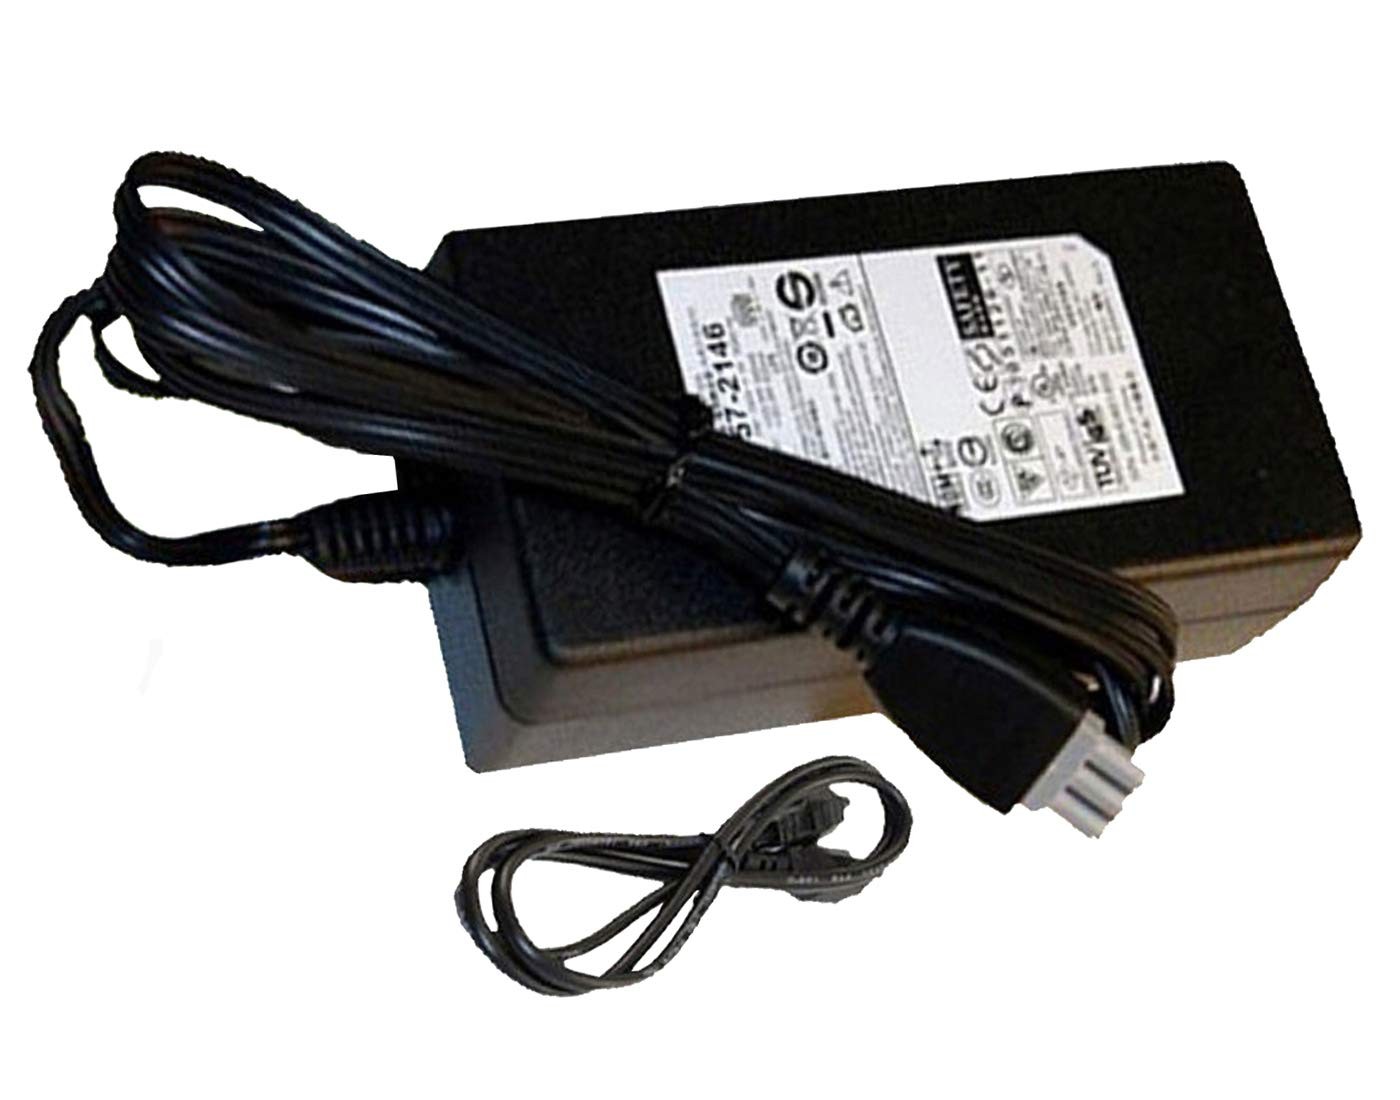 UpBright AC Adapter Replacement For HP smart C4450 C4480 C4345 C4383 C4285 C4293 C4390 4200 C4472 C4473 C4550 C4283 C4188 C4183 C4180 C4155 C4150 7755